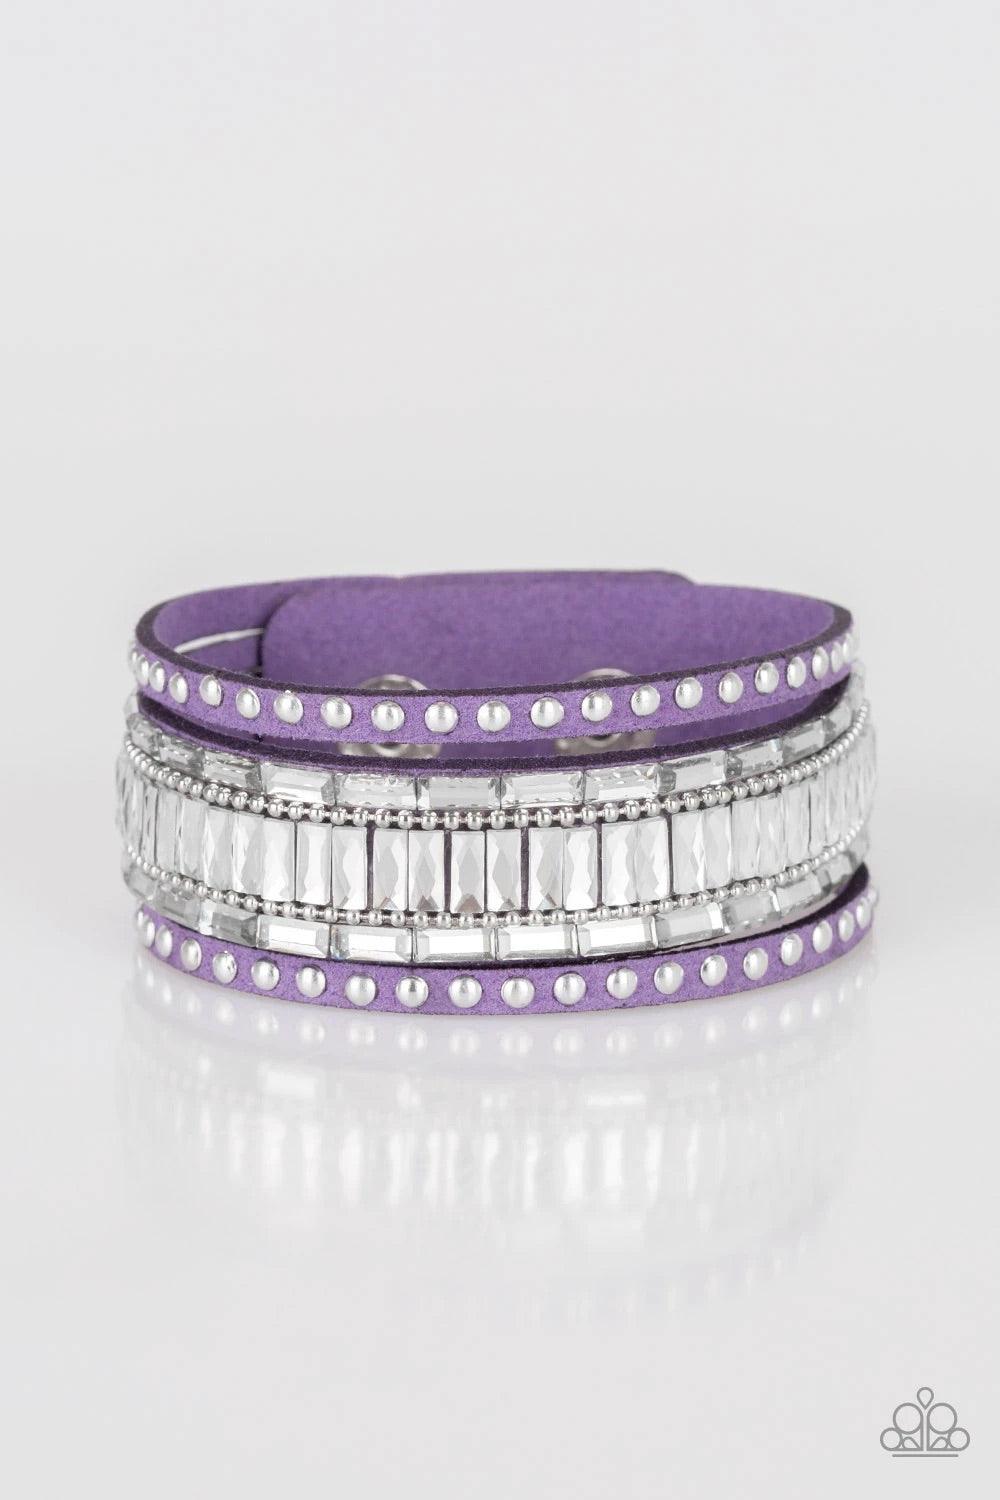 Paparazzi Accessories Rock Star Rocker - Purple Shiny silver studs, dainty silver ball chains, and edgy white emerald-cut rhinestones race along a spliced purple suede band for a rock star look. Features an adjustable snap closure. Sold as one individual